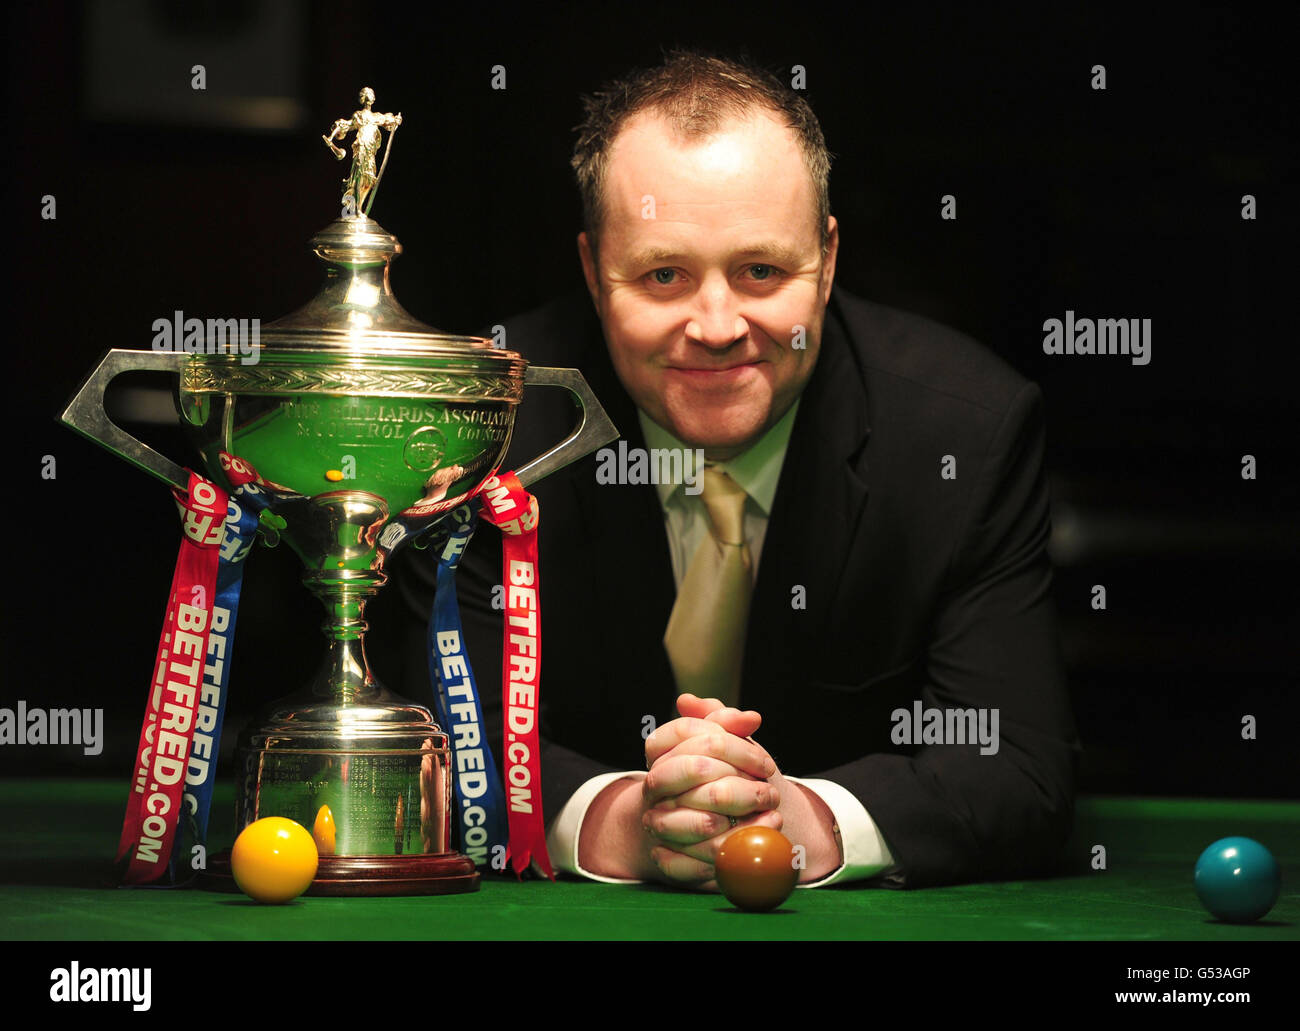 Current World Snooker Champion John Higgins during Betfred Snooker Championships at the RAC Club, London Stock Photo -